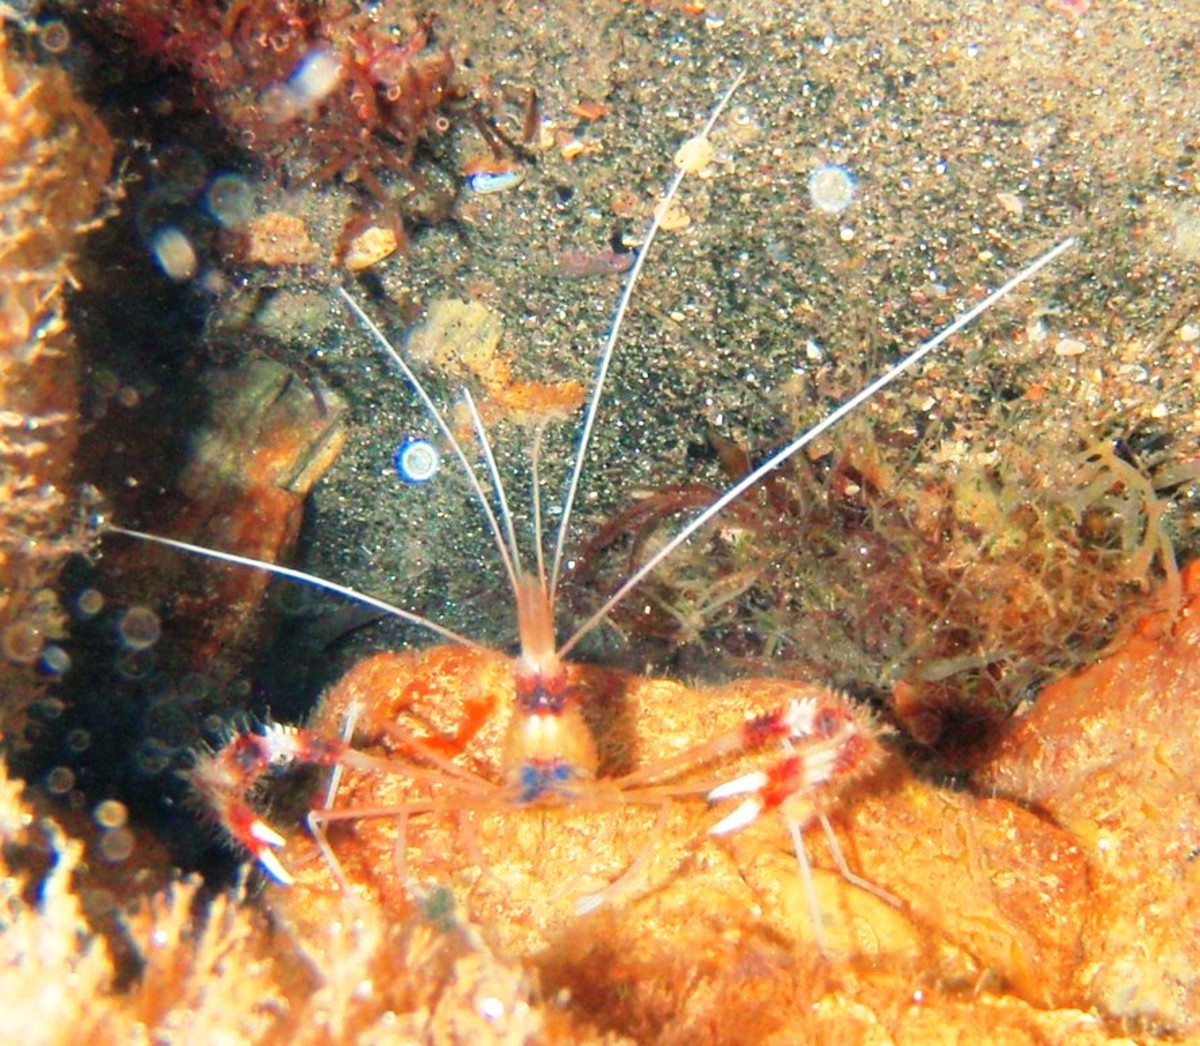 Hairy legged shrimp found on the ocean floor - the only way to see him alive is to get in the water.